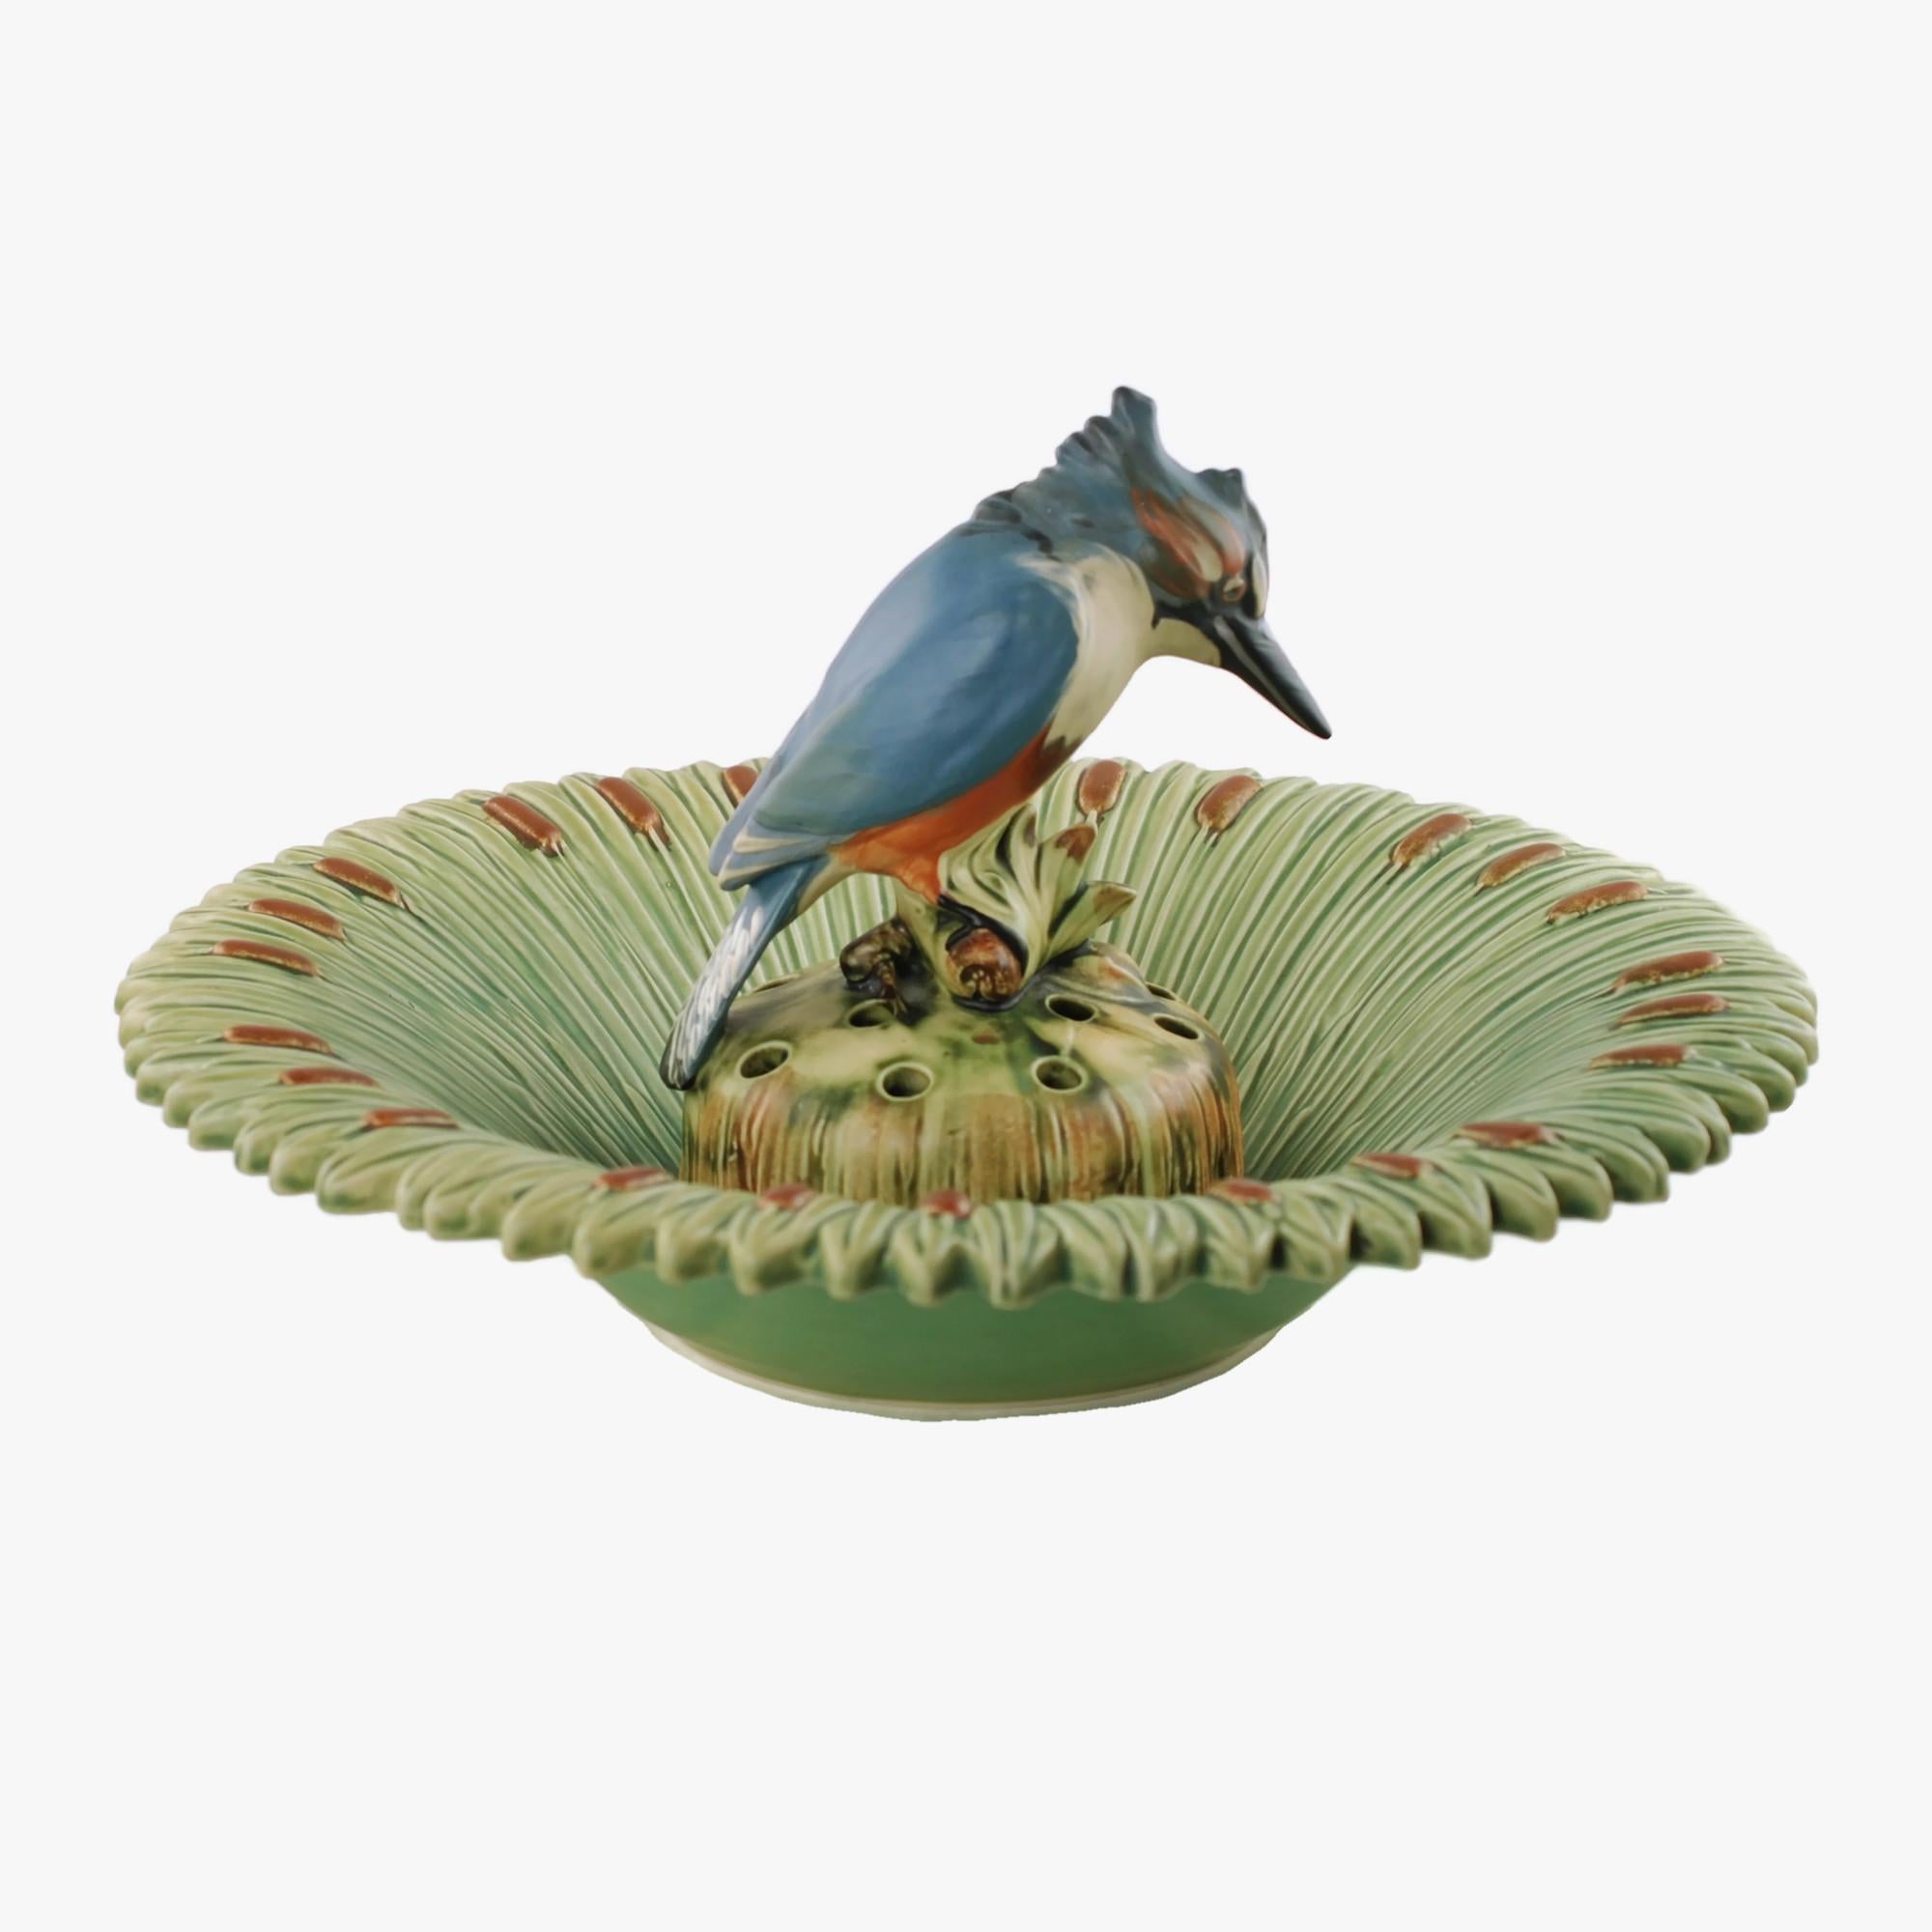 This beautifully decorated American Arts & Crafts era flower frog and associated console bowl were made by Weller Pottery of Ohio and are from Weller's popular Ardsley range. The flower frog has been crafted in the form of large ovoid mossy rock